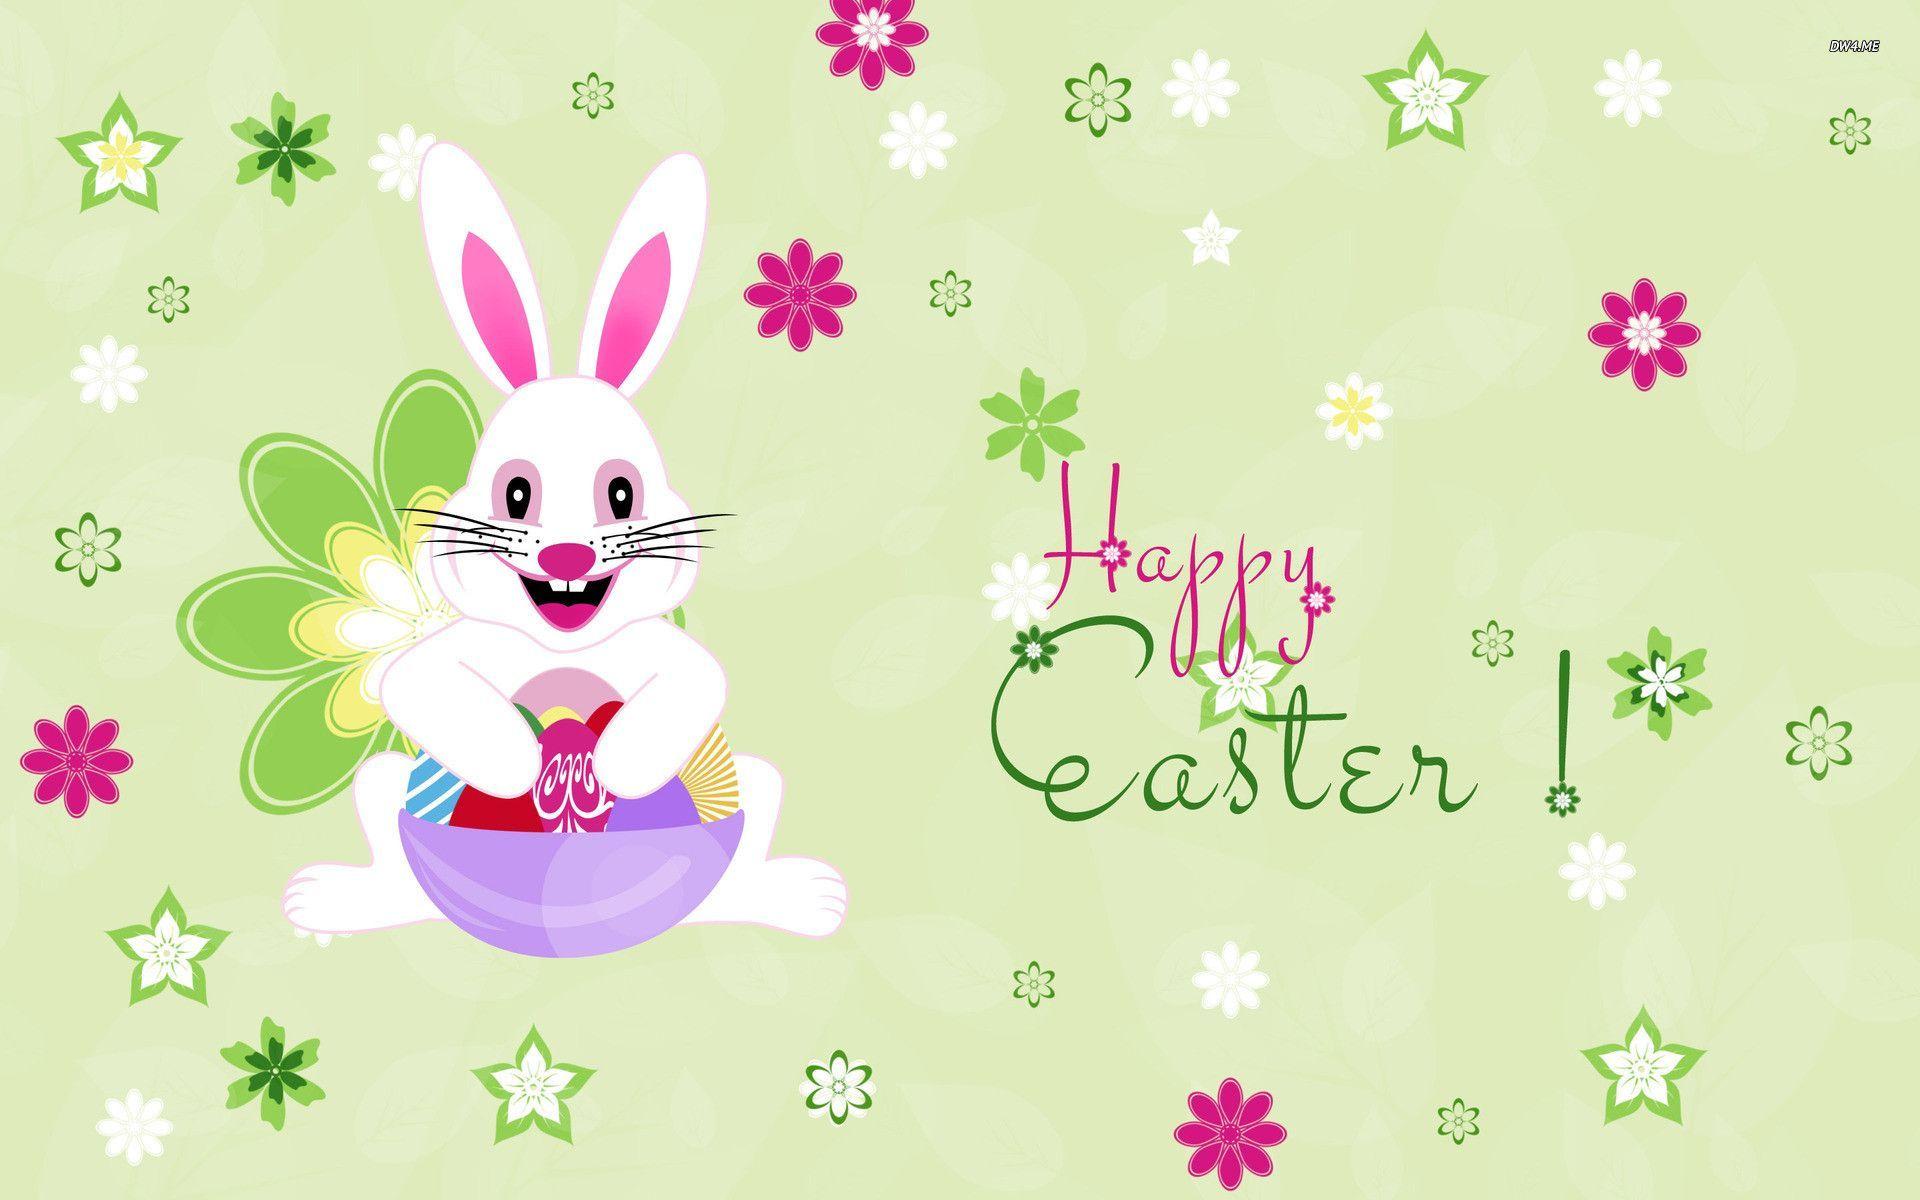 Happy Easter! wallpapers